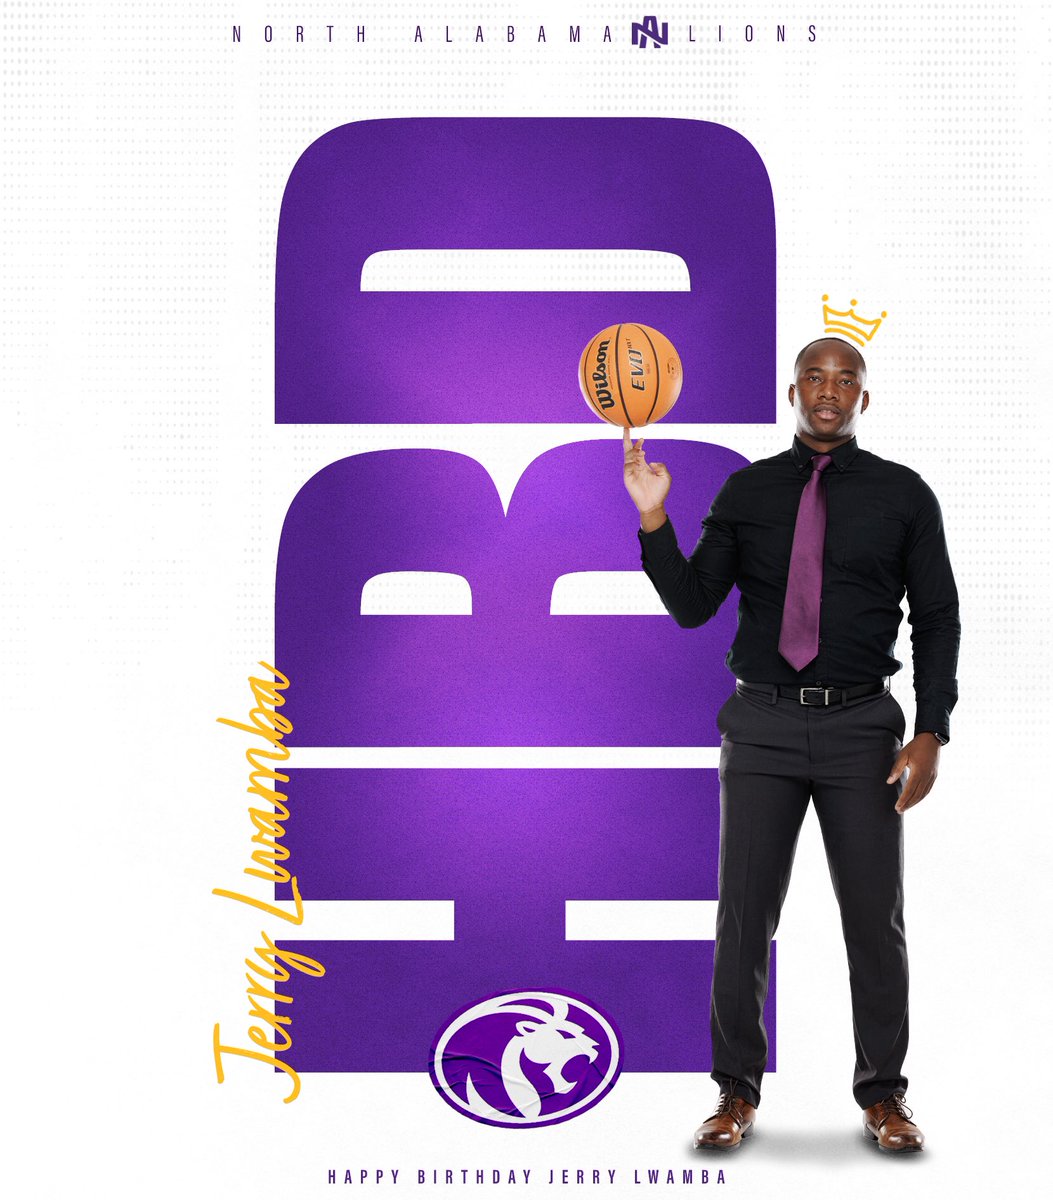 🗣Everyone stop what you’re doing and wish JERRY LWAMBA a HAPPY BIRTHDAY!!🥳 #RoarLions🦁